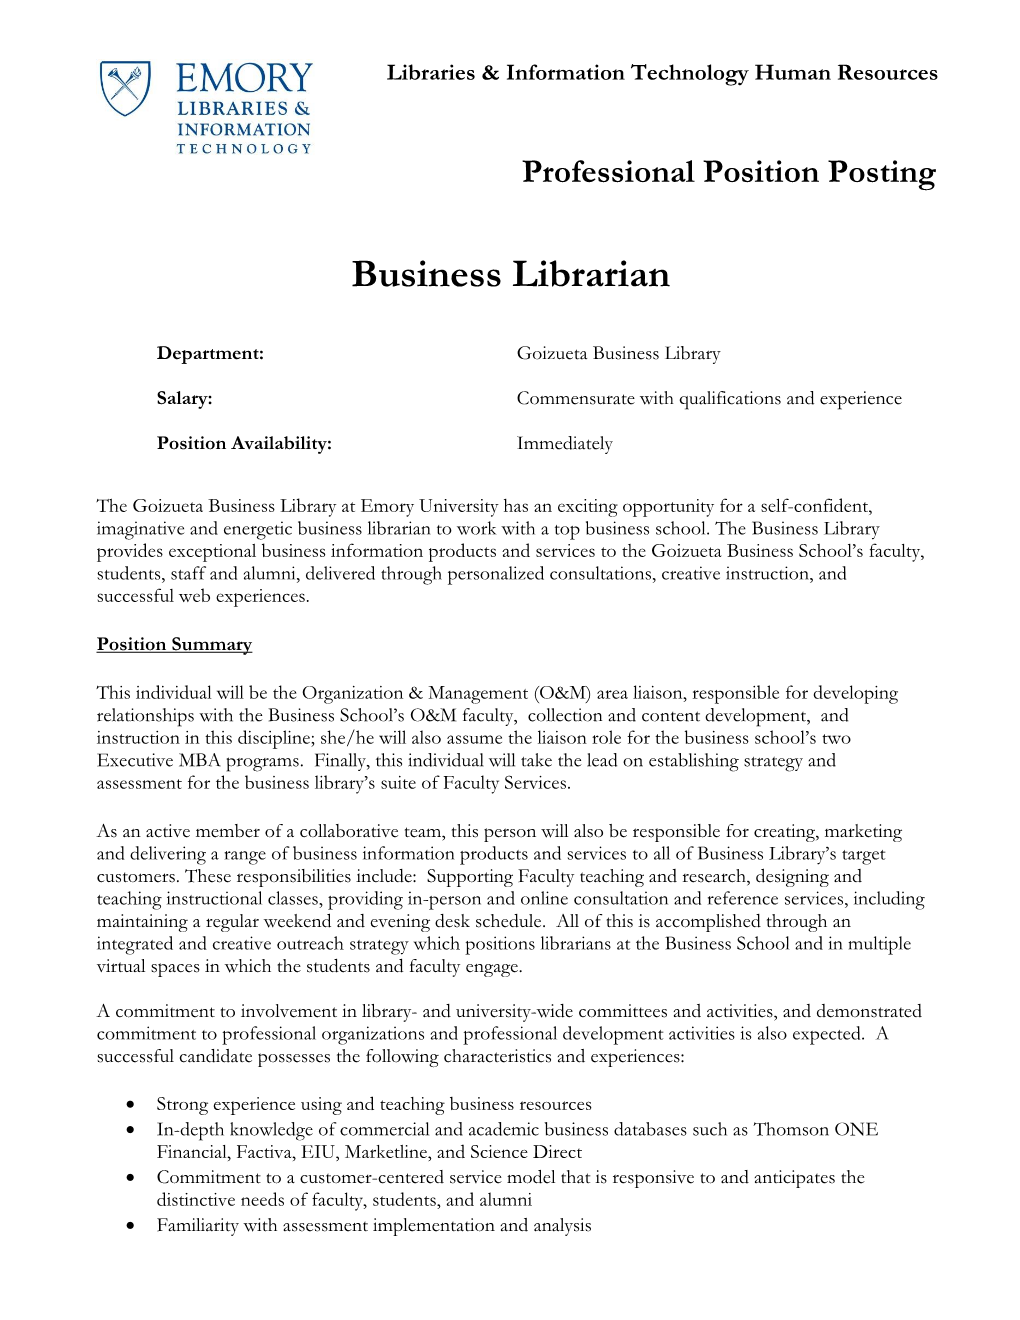 Business Librarian